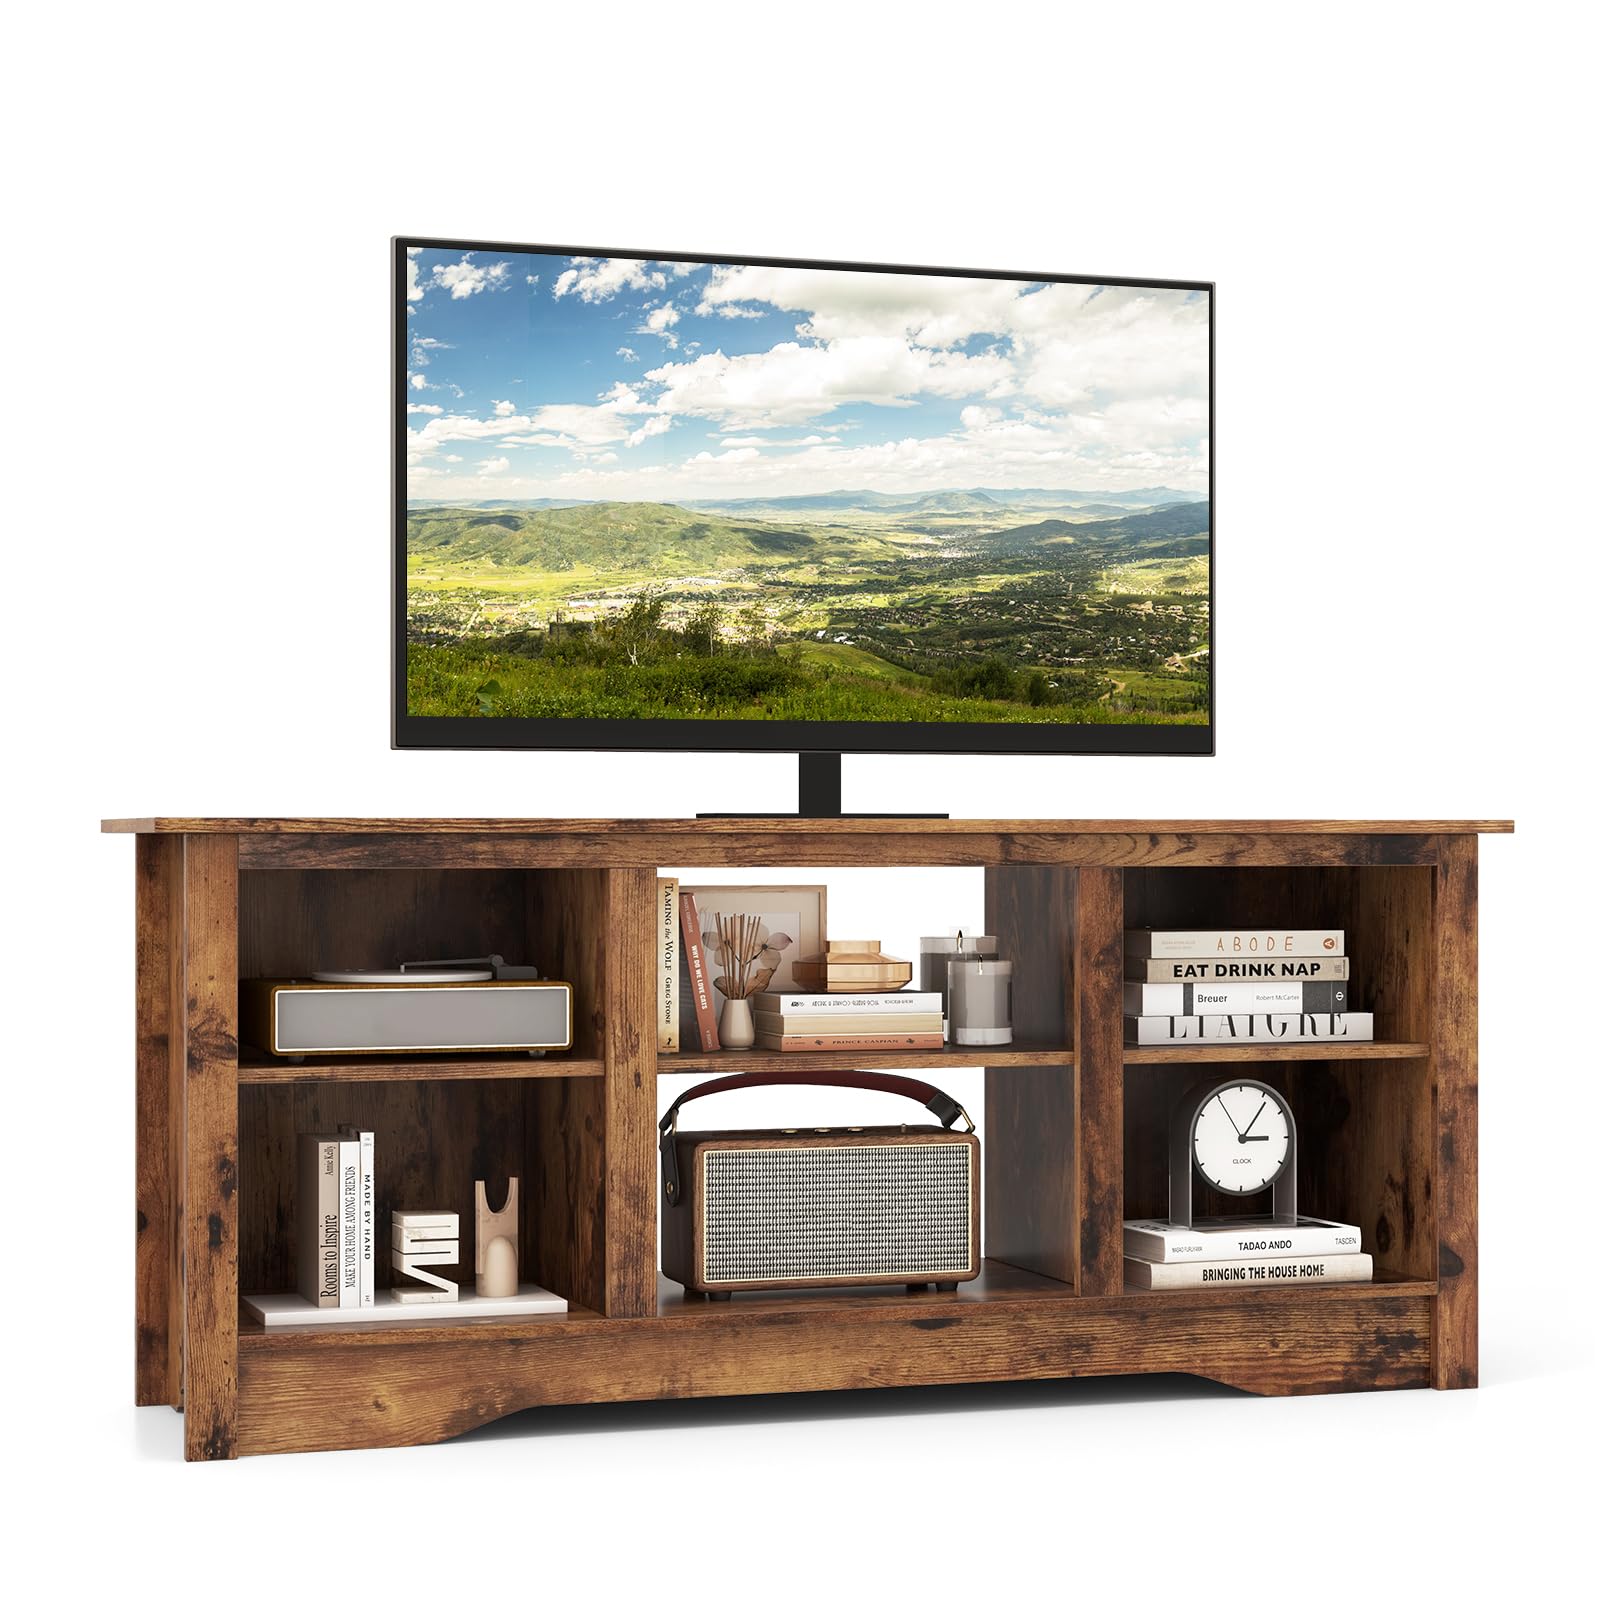 Giantex 58" TV Stand for Living Room 65" TV - Fireplace TV Cabinet for 18" Electric Fireplace (Not Included)